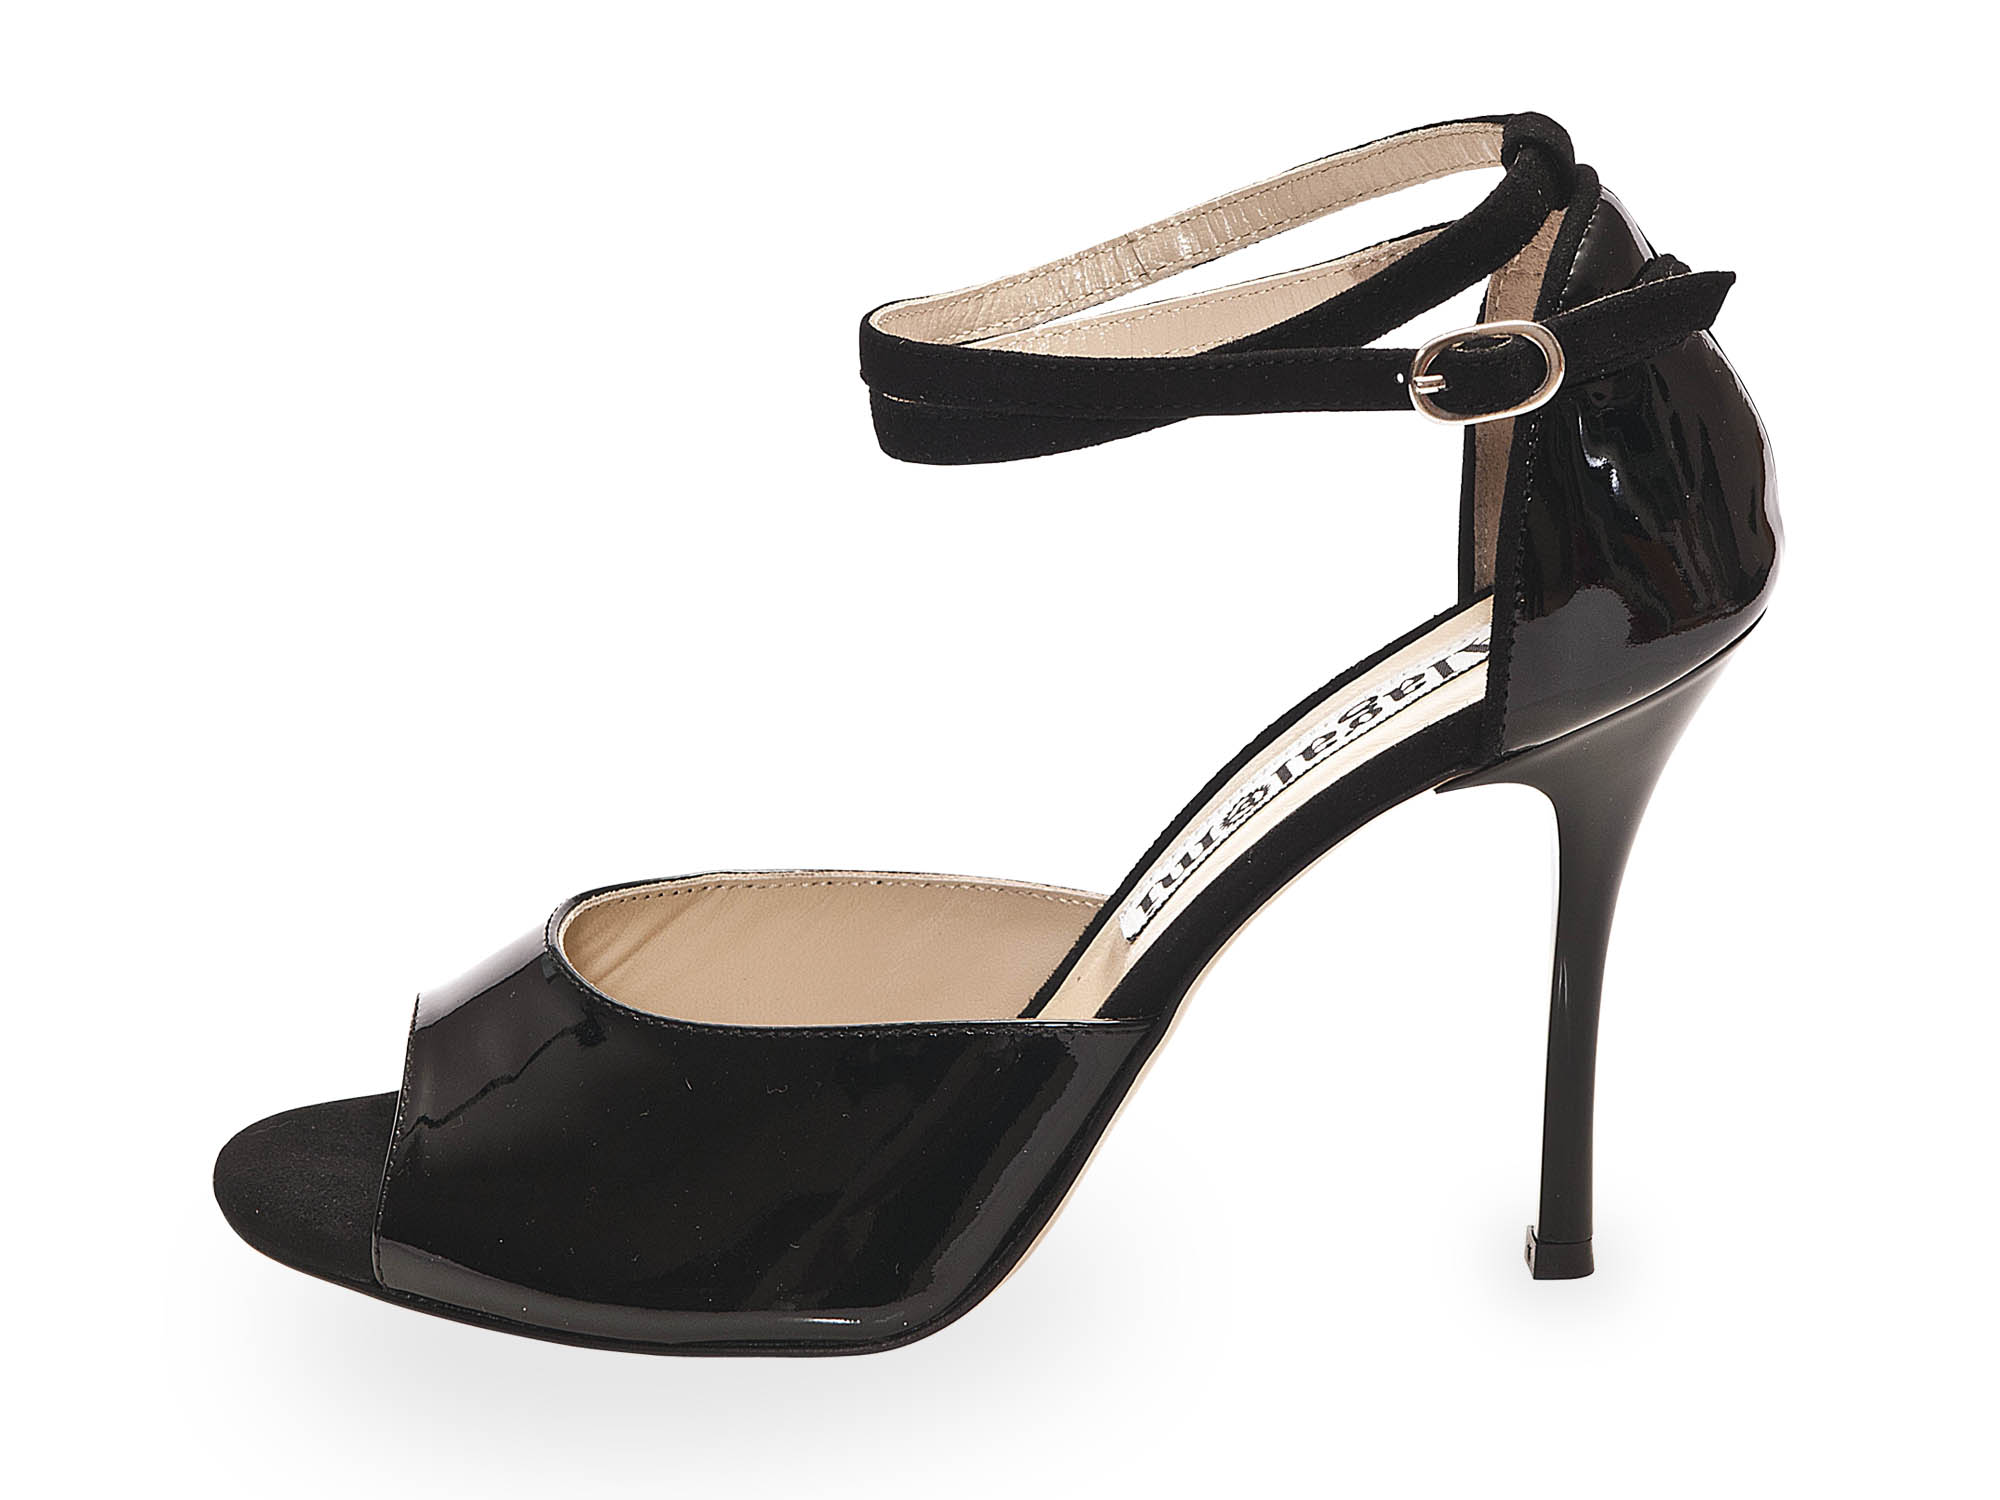 Lily Double Strap Black Patent Leather